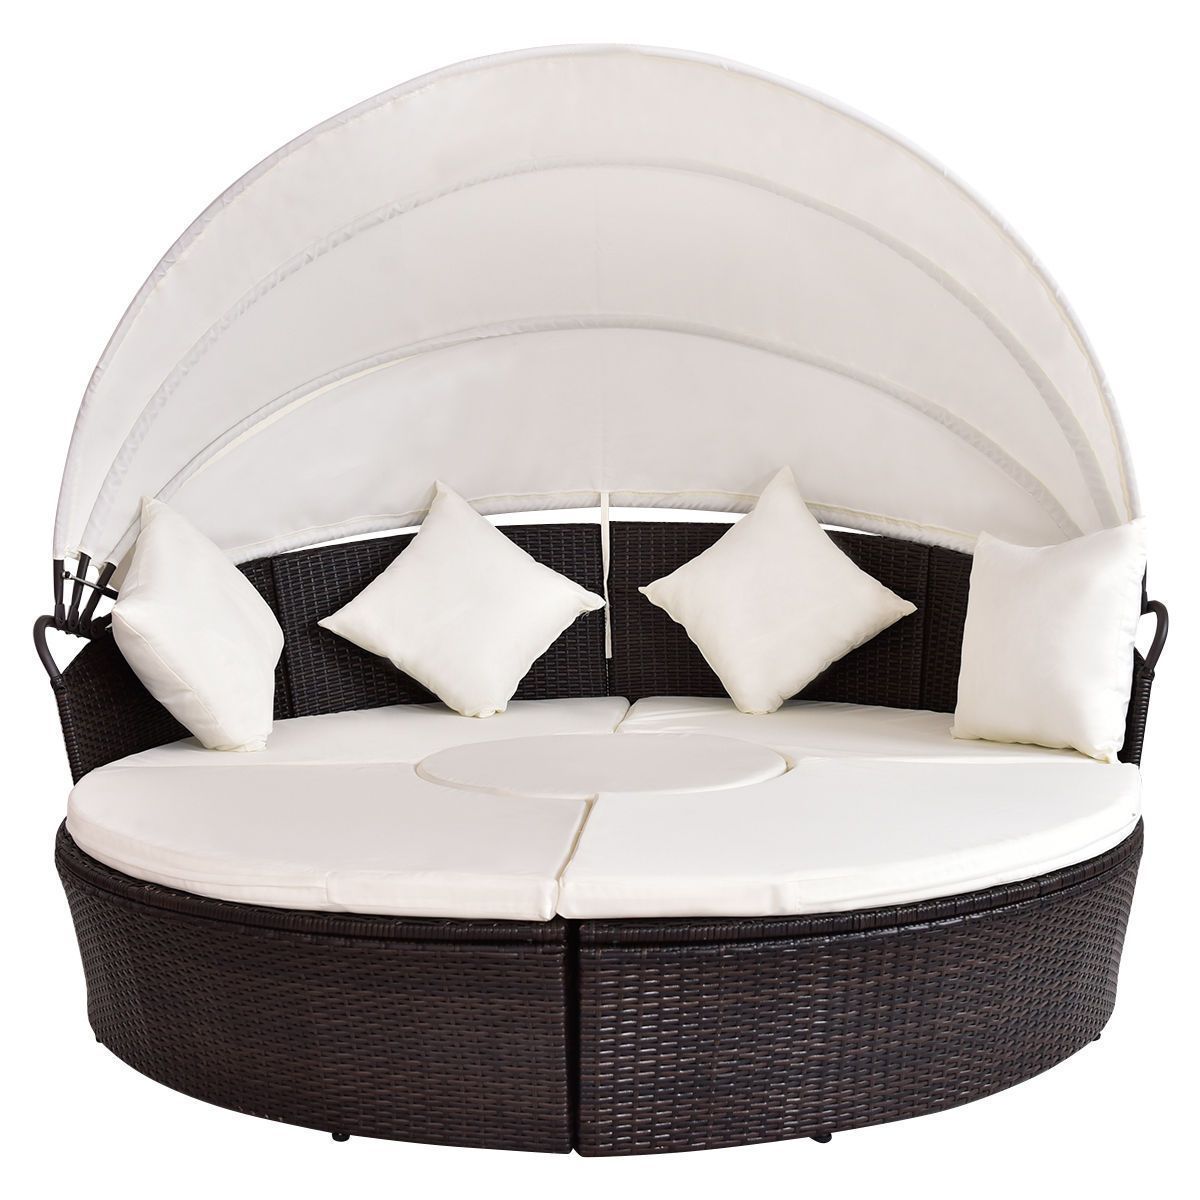 Jacinto - Canopy Cushioned Round Daybed Sofa - Nordic Side - 07-03, feed-cl0-over-80-dollars, furniture-tag, us-ship